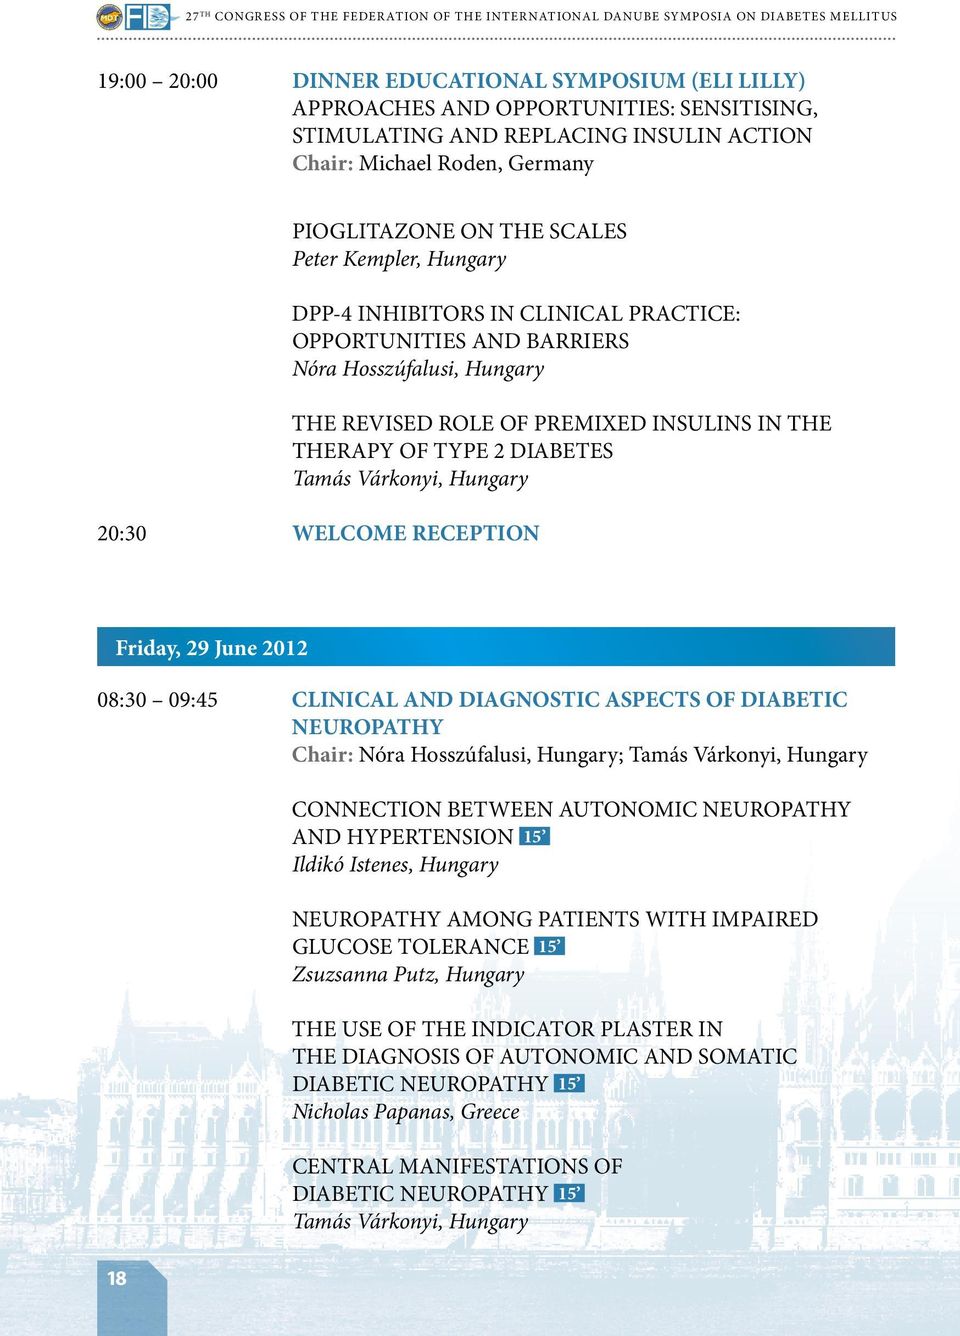 Hungary the REVISED ROLE OF PREMIXED INSULINS IN THE THERAPY OF TYPE 2 DIABETES Tamás Várkonyi, Hungary 20:30 WELCOME RECEPTION Friday, 29 June 2012 08:30 09:45 CLINICAL AND DIAGNOSTIC ASPECTS OF